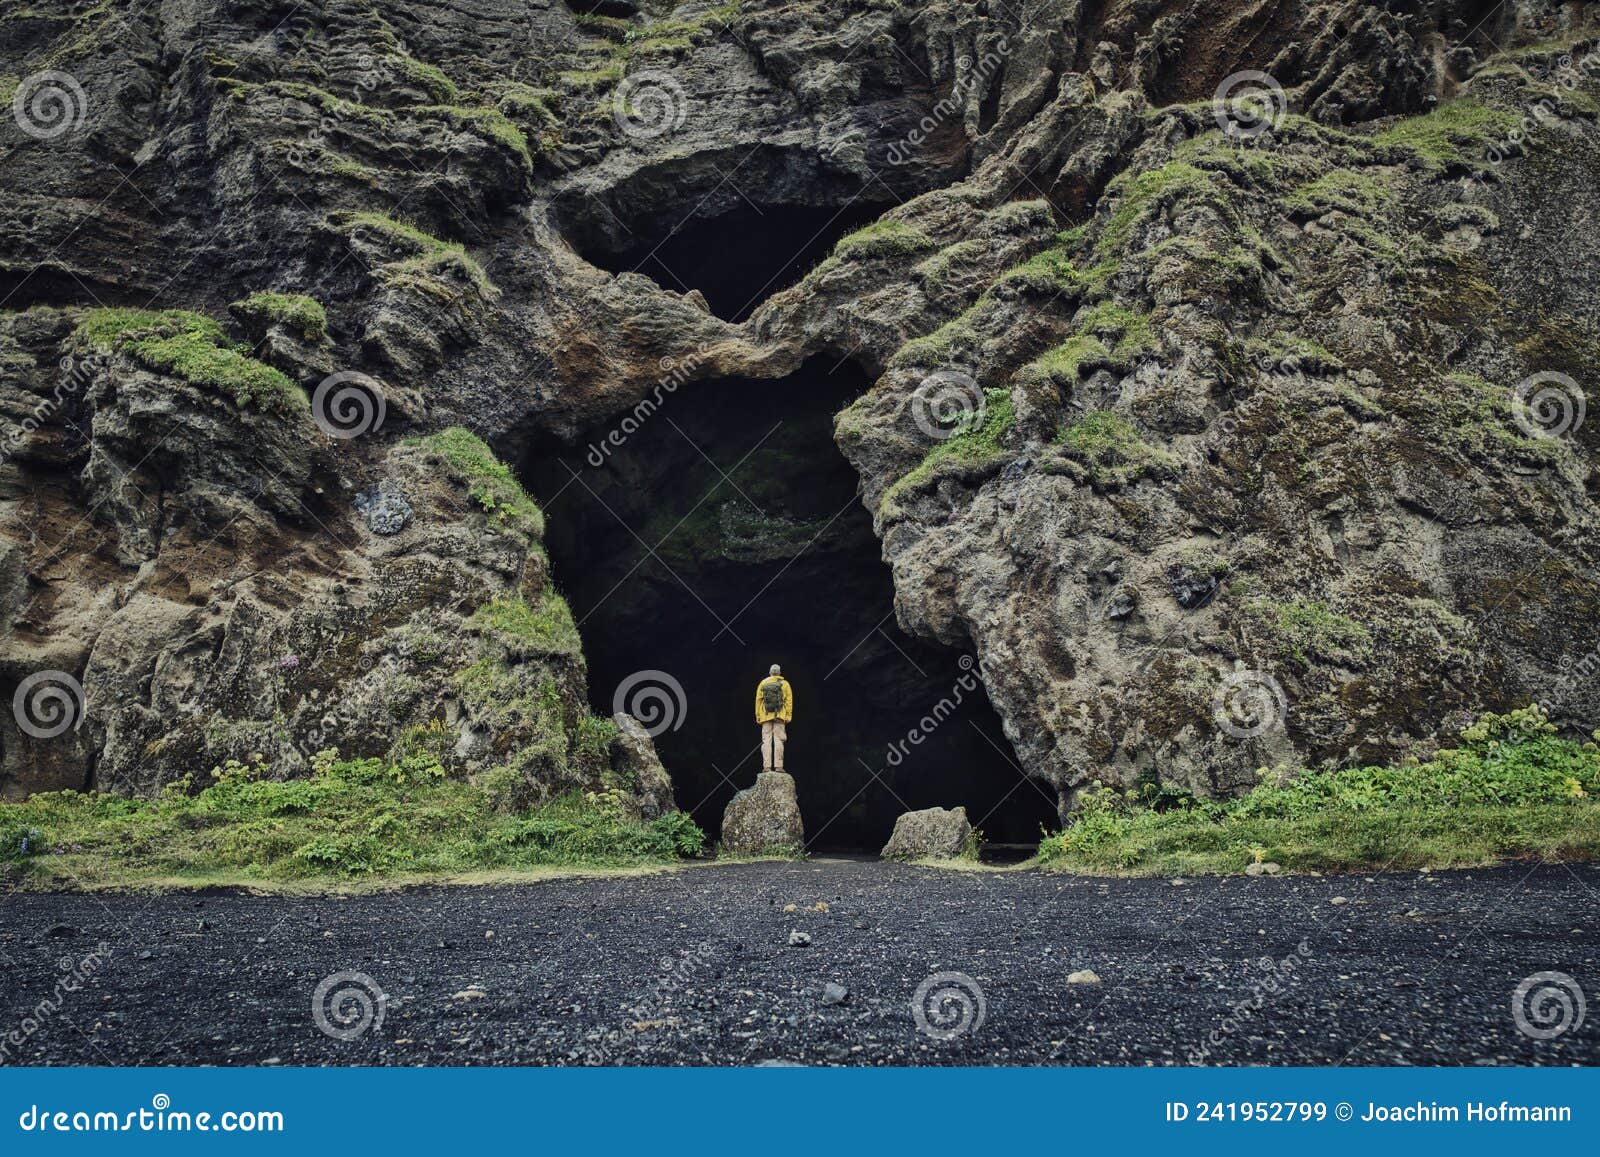 yoda cave at hjorleifshofdi in iceland, guy with yellow raincoat and backpack